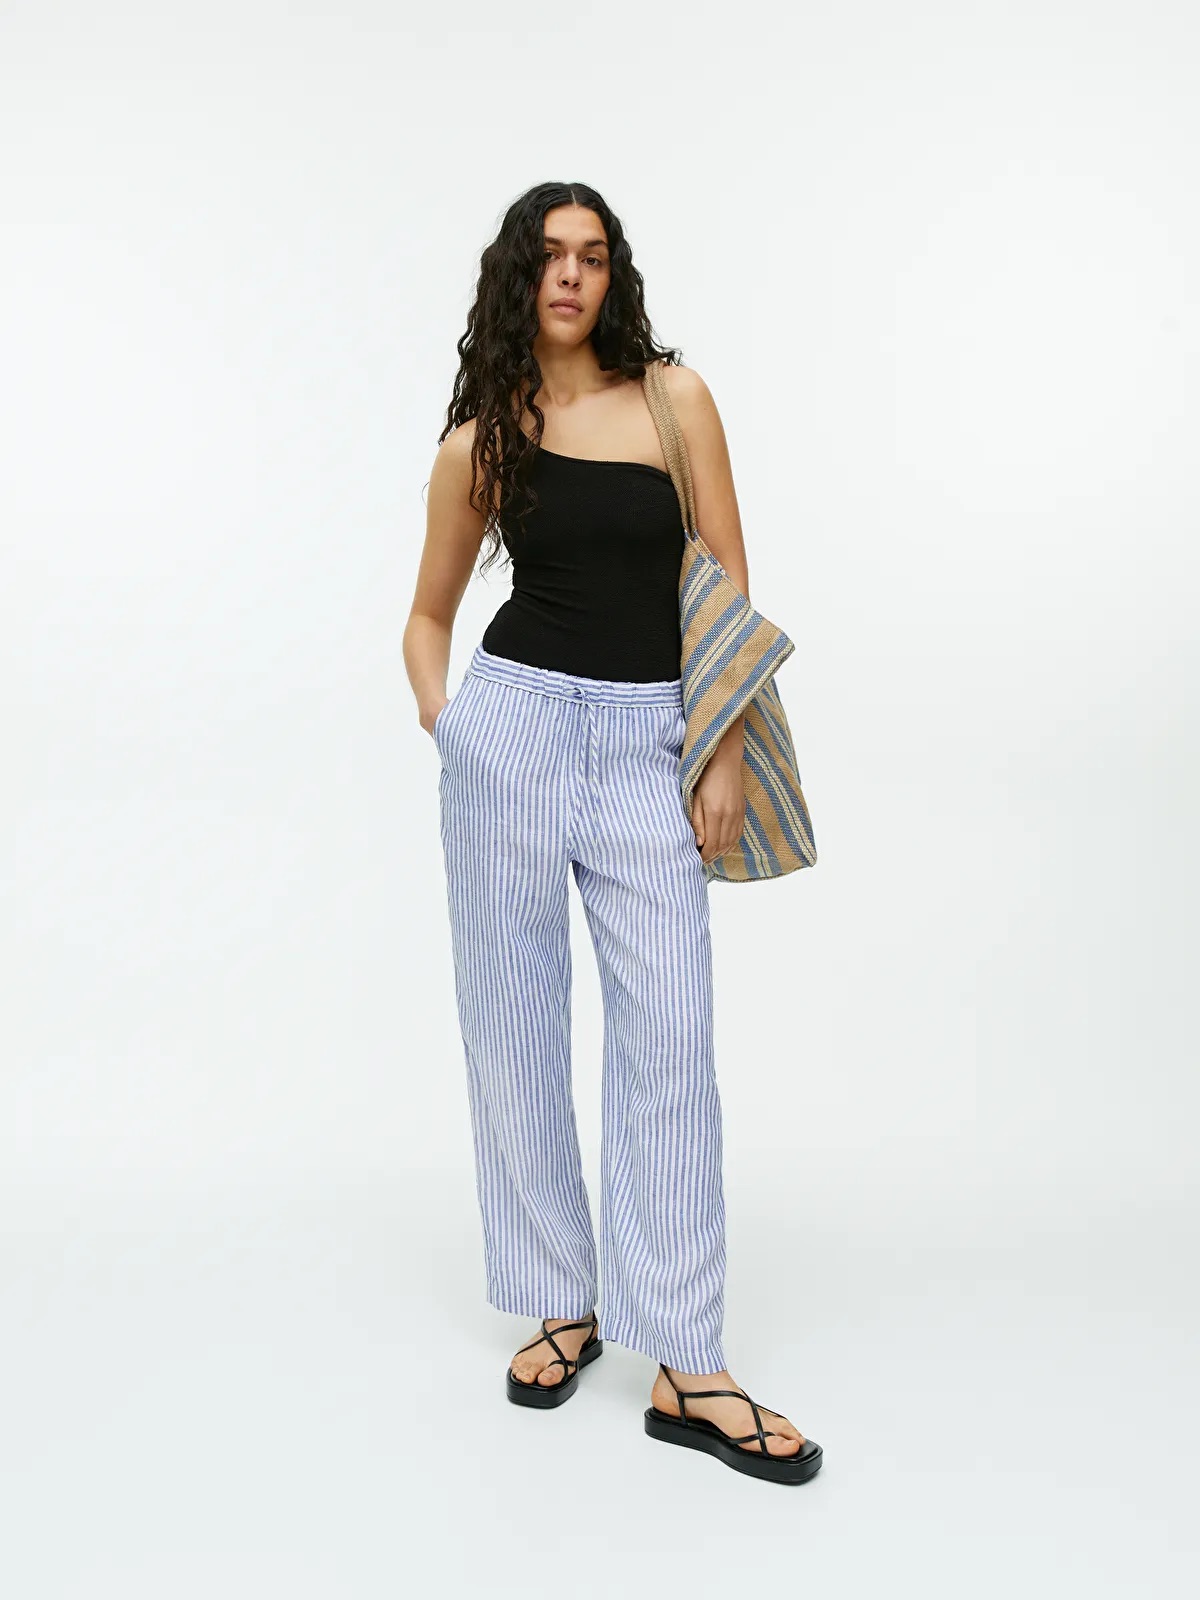 Arket's Linen Drawstring Trousers Are Perfect for Summer | Who What Wear UK